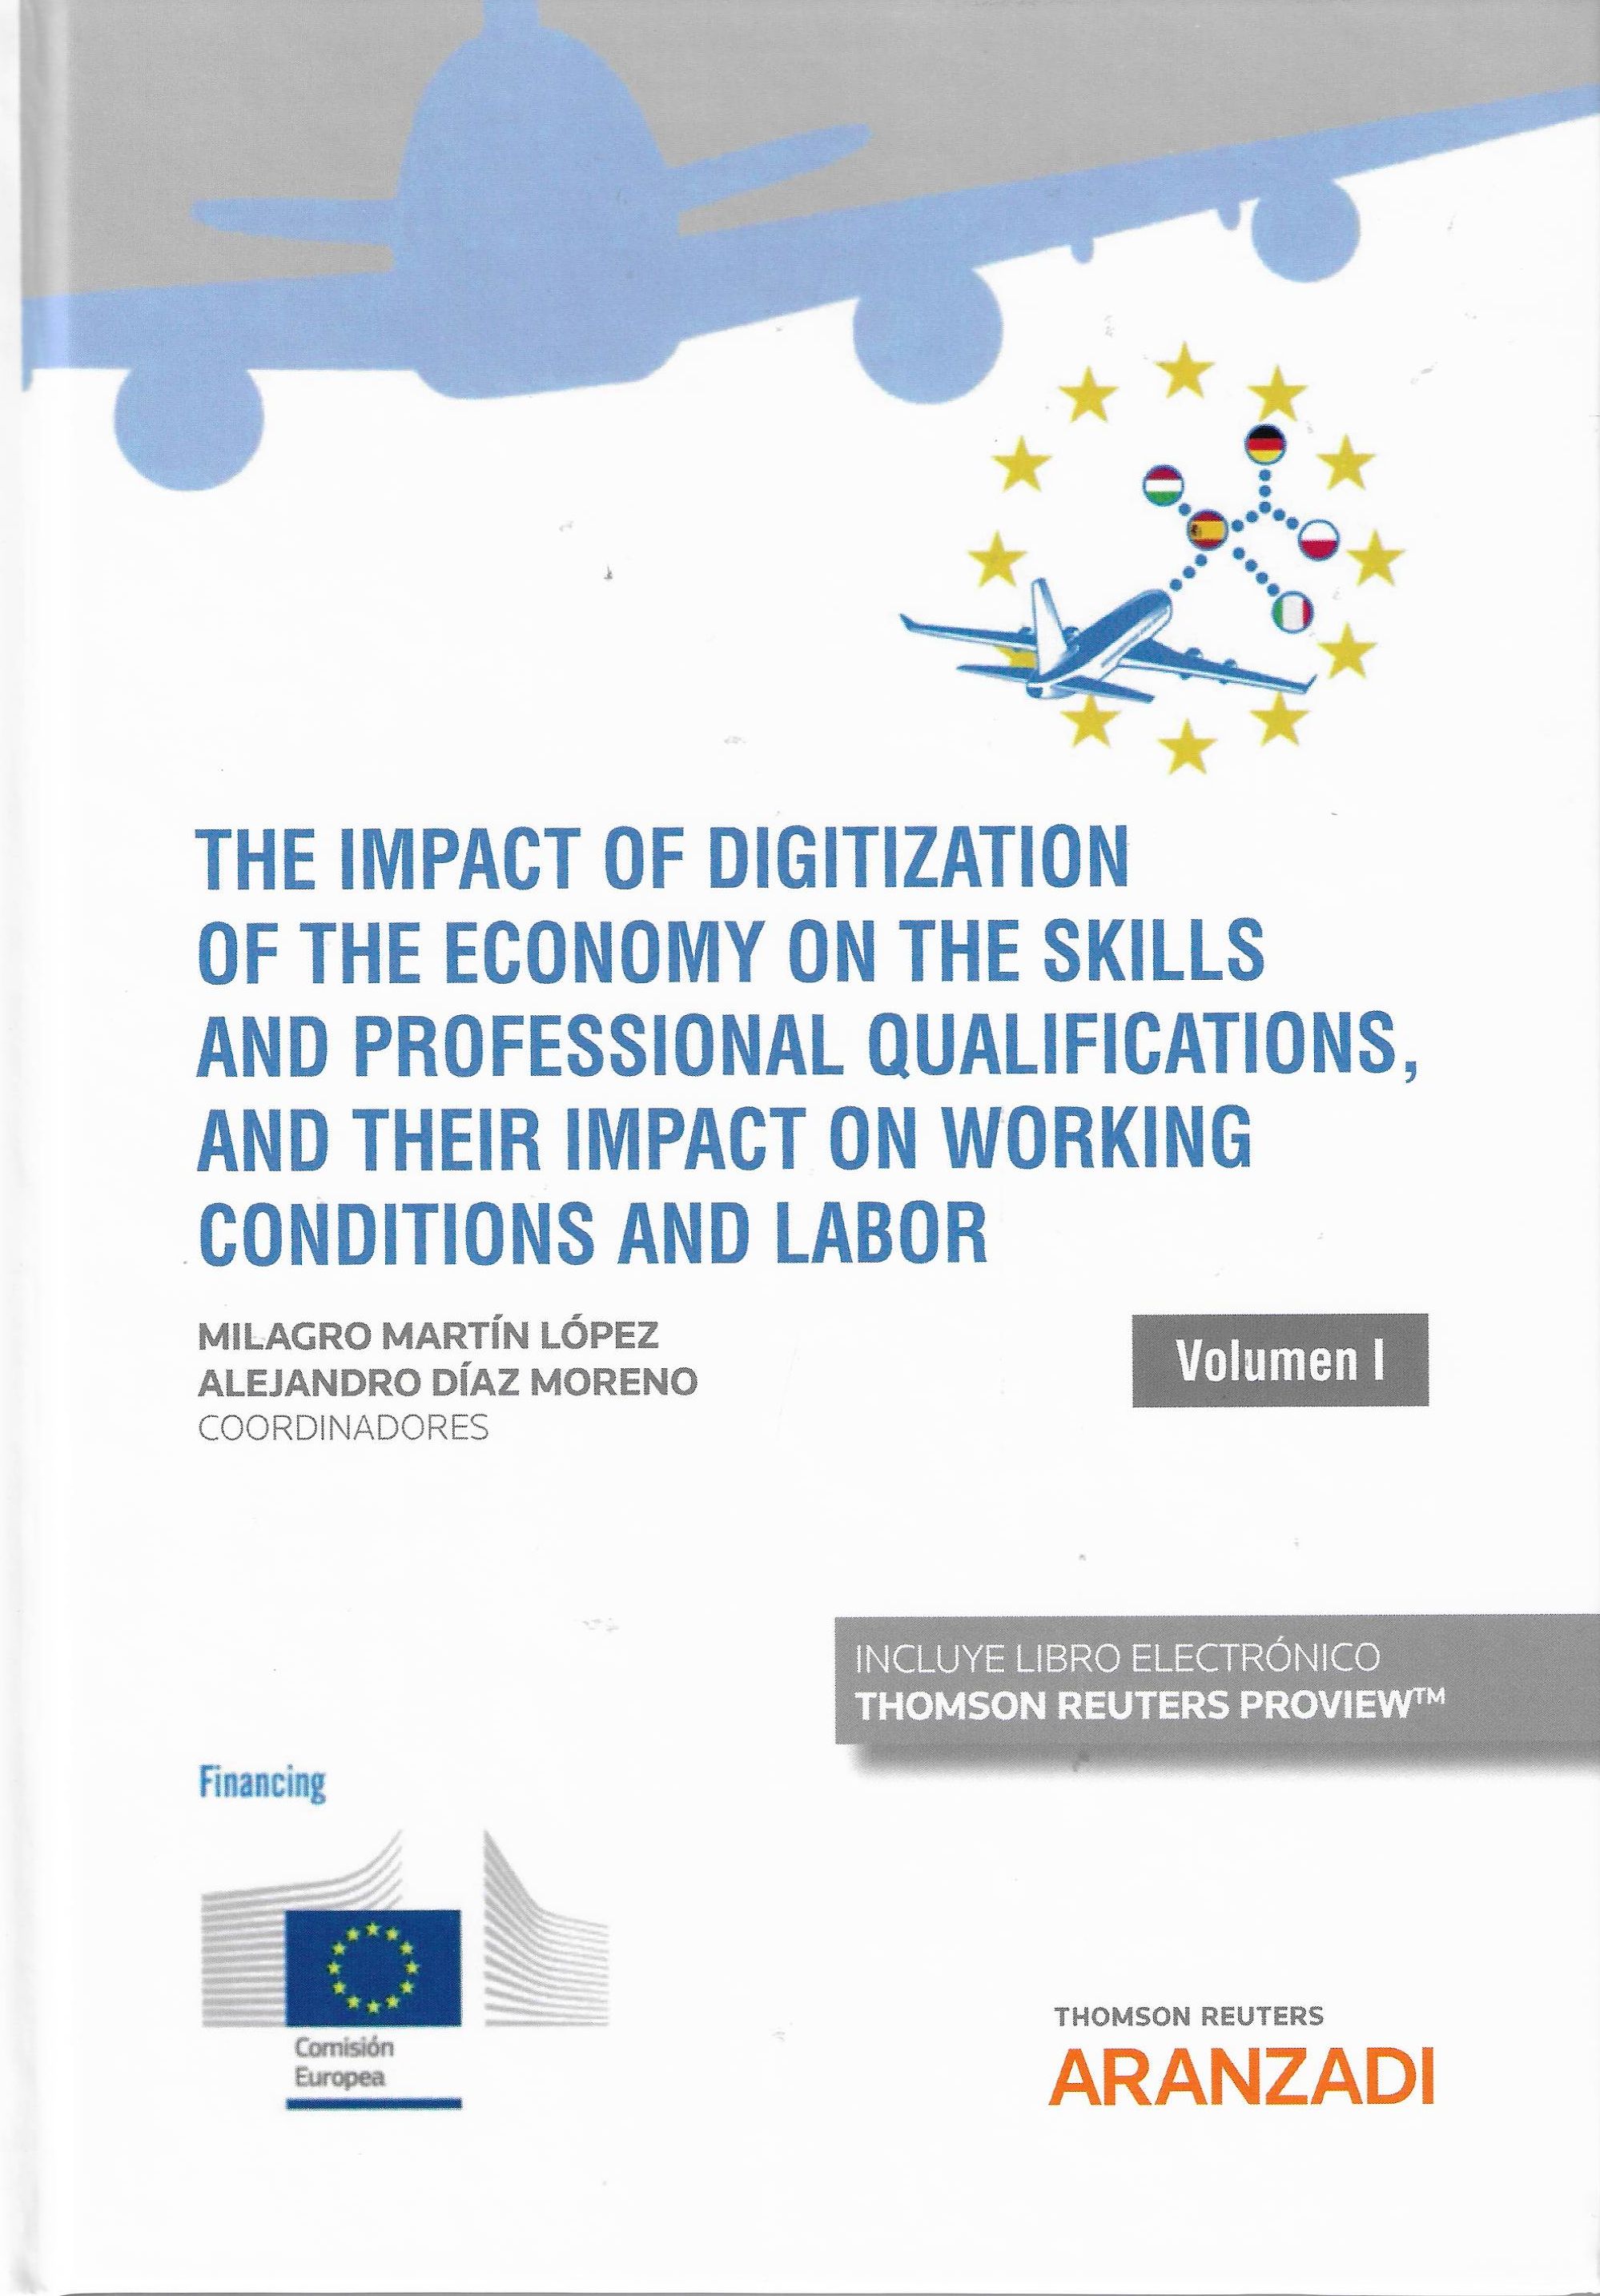 Imagen de portada del libro The impact of digitization of the economy on the skills and professional qualifications, and their impact on working conditions and labor